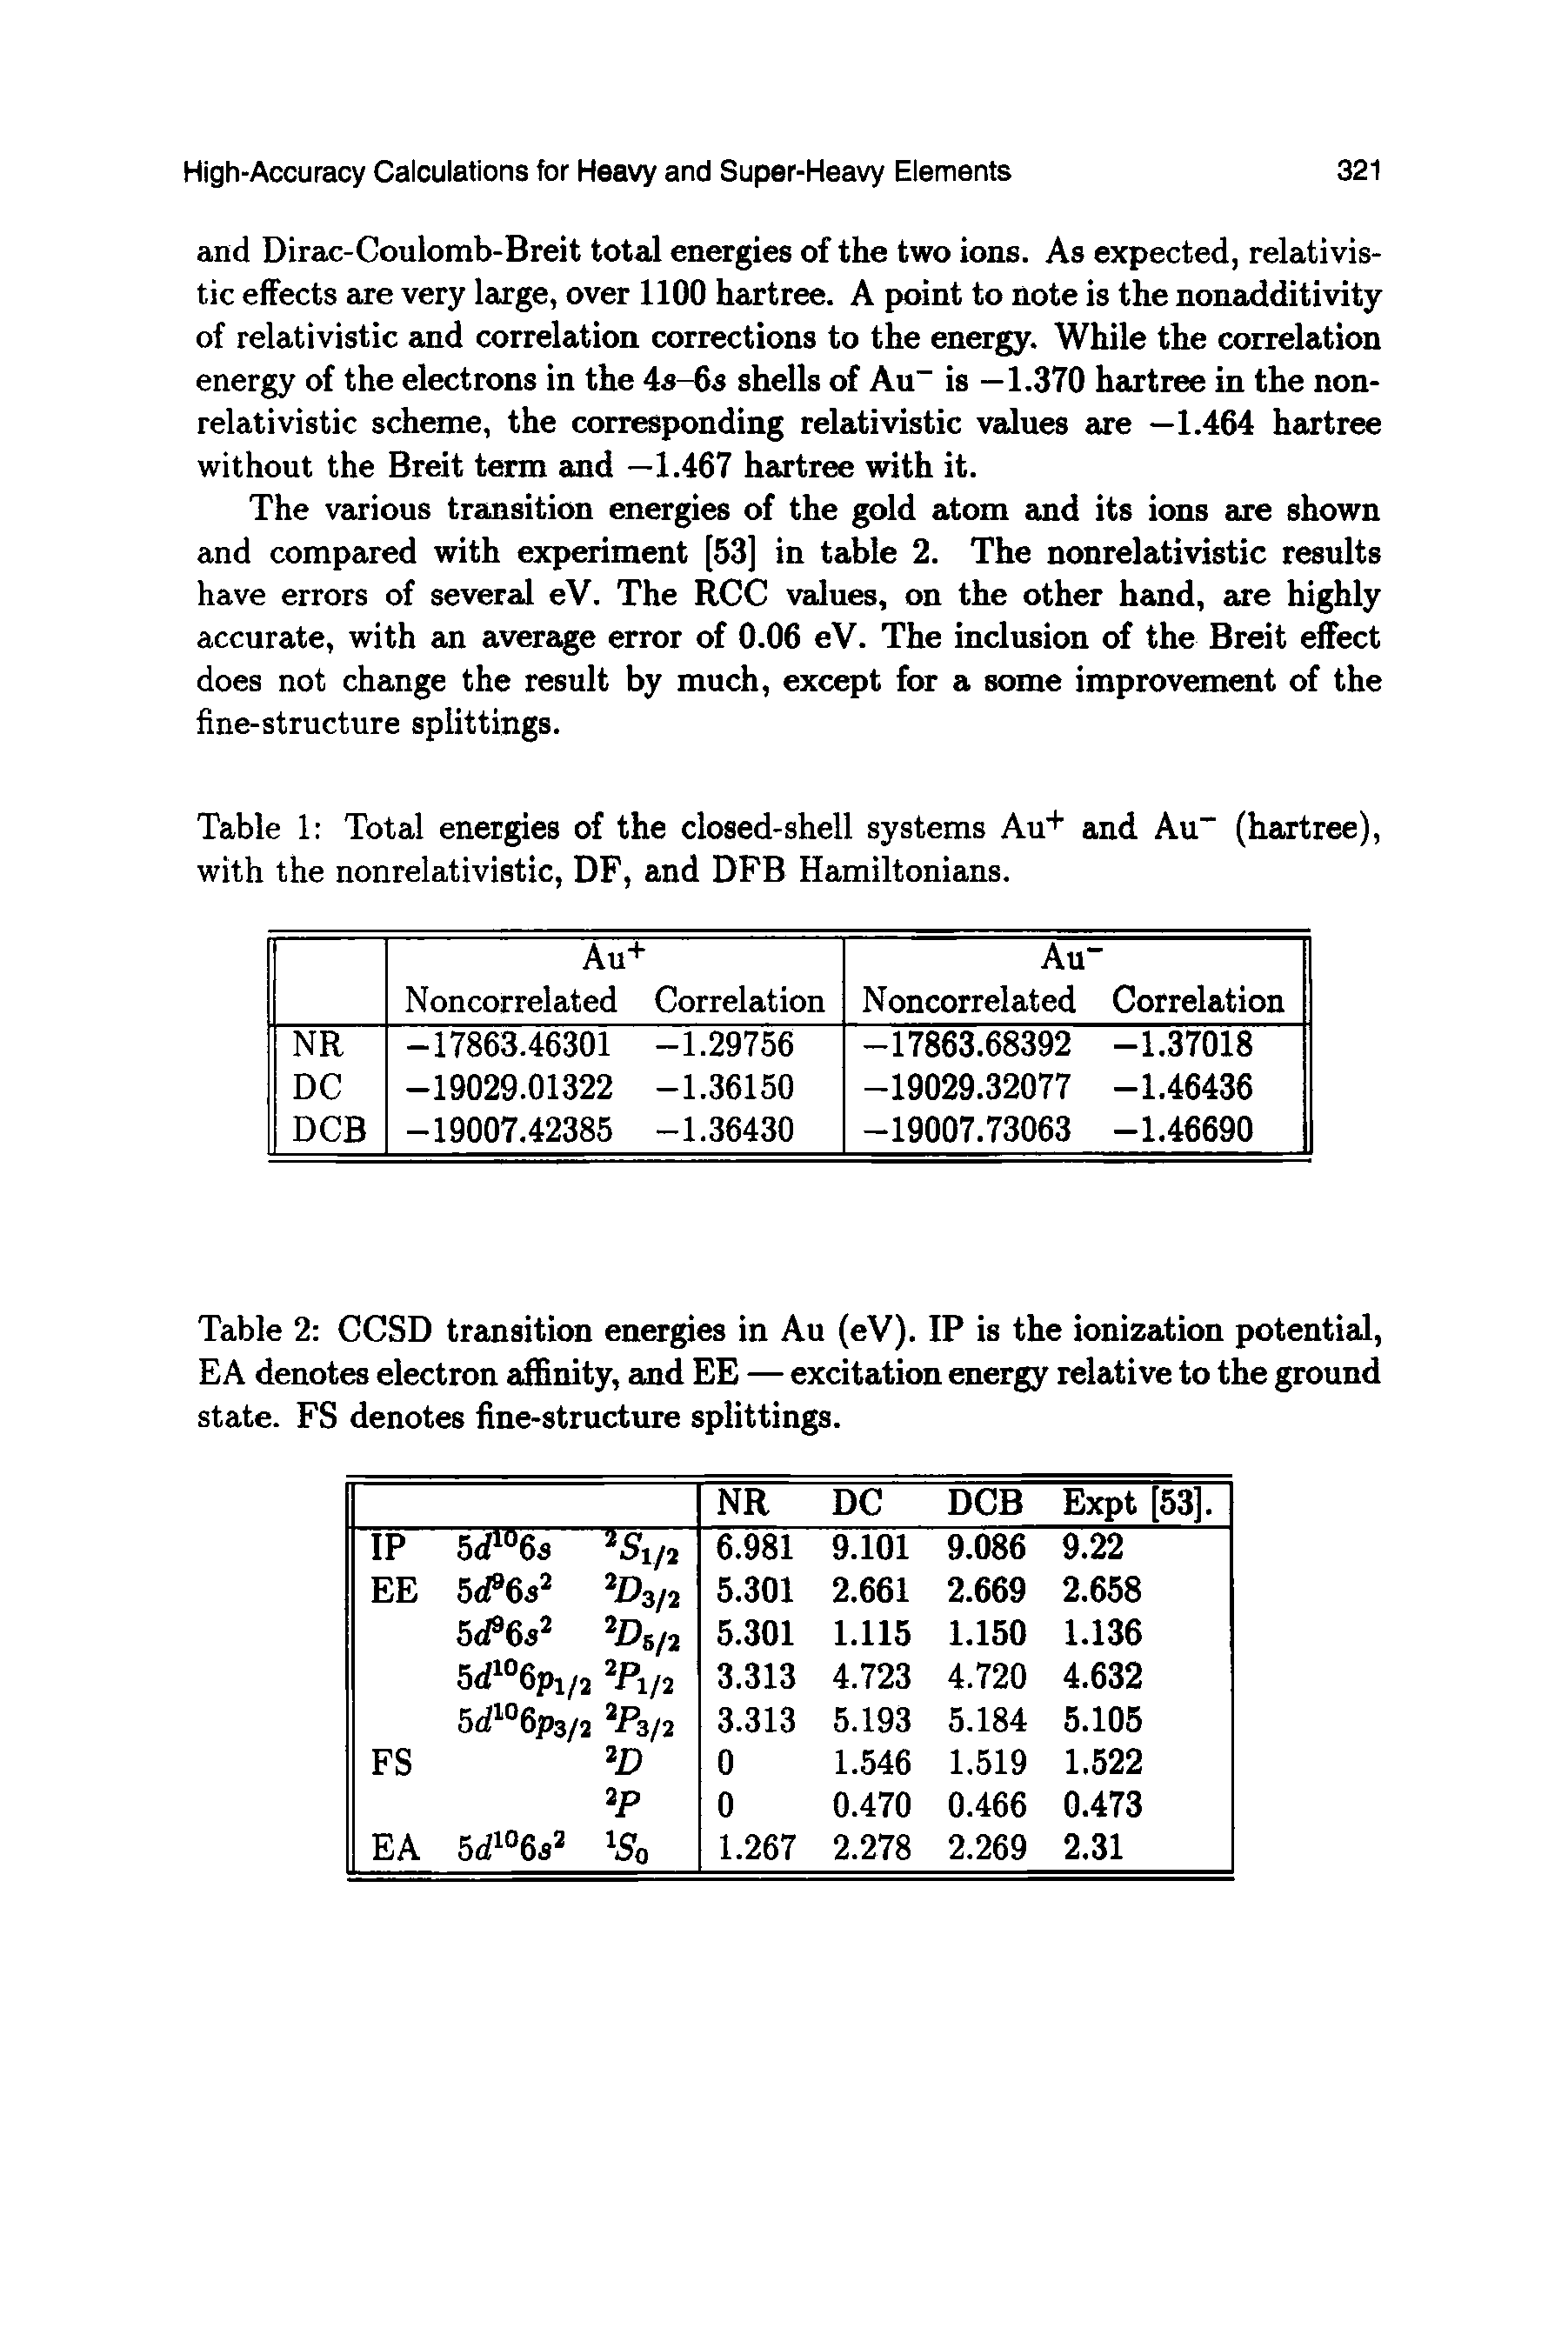 Table 2 CCSD transition energies in Au (eV). IP is the ionization potential, EA denotes electron affinity, and EE — excitation energy relative to the ground state. FS denotes fine-structure splittings.